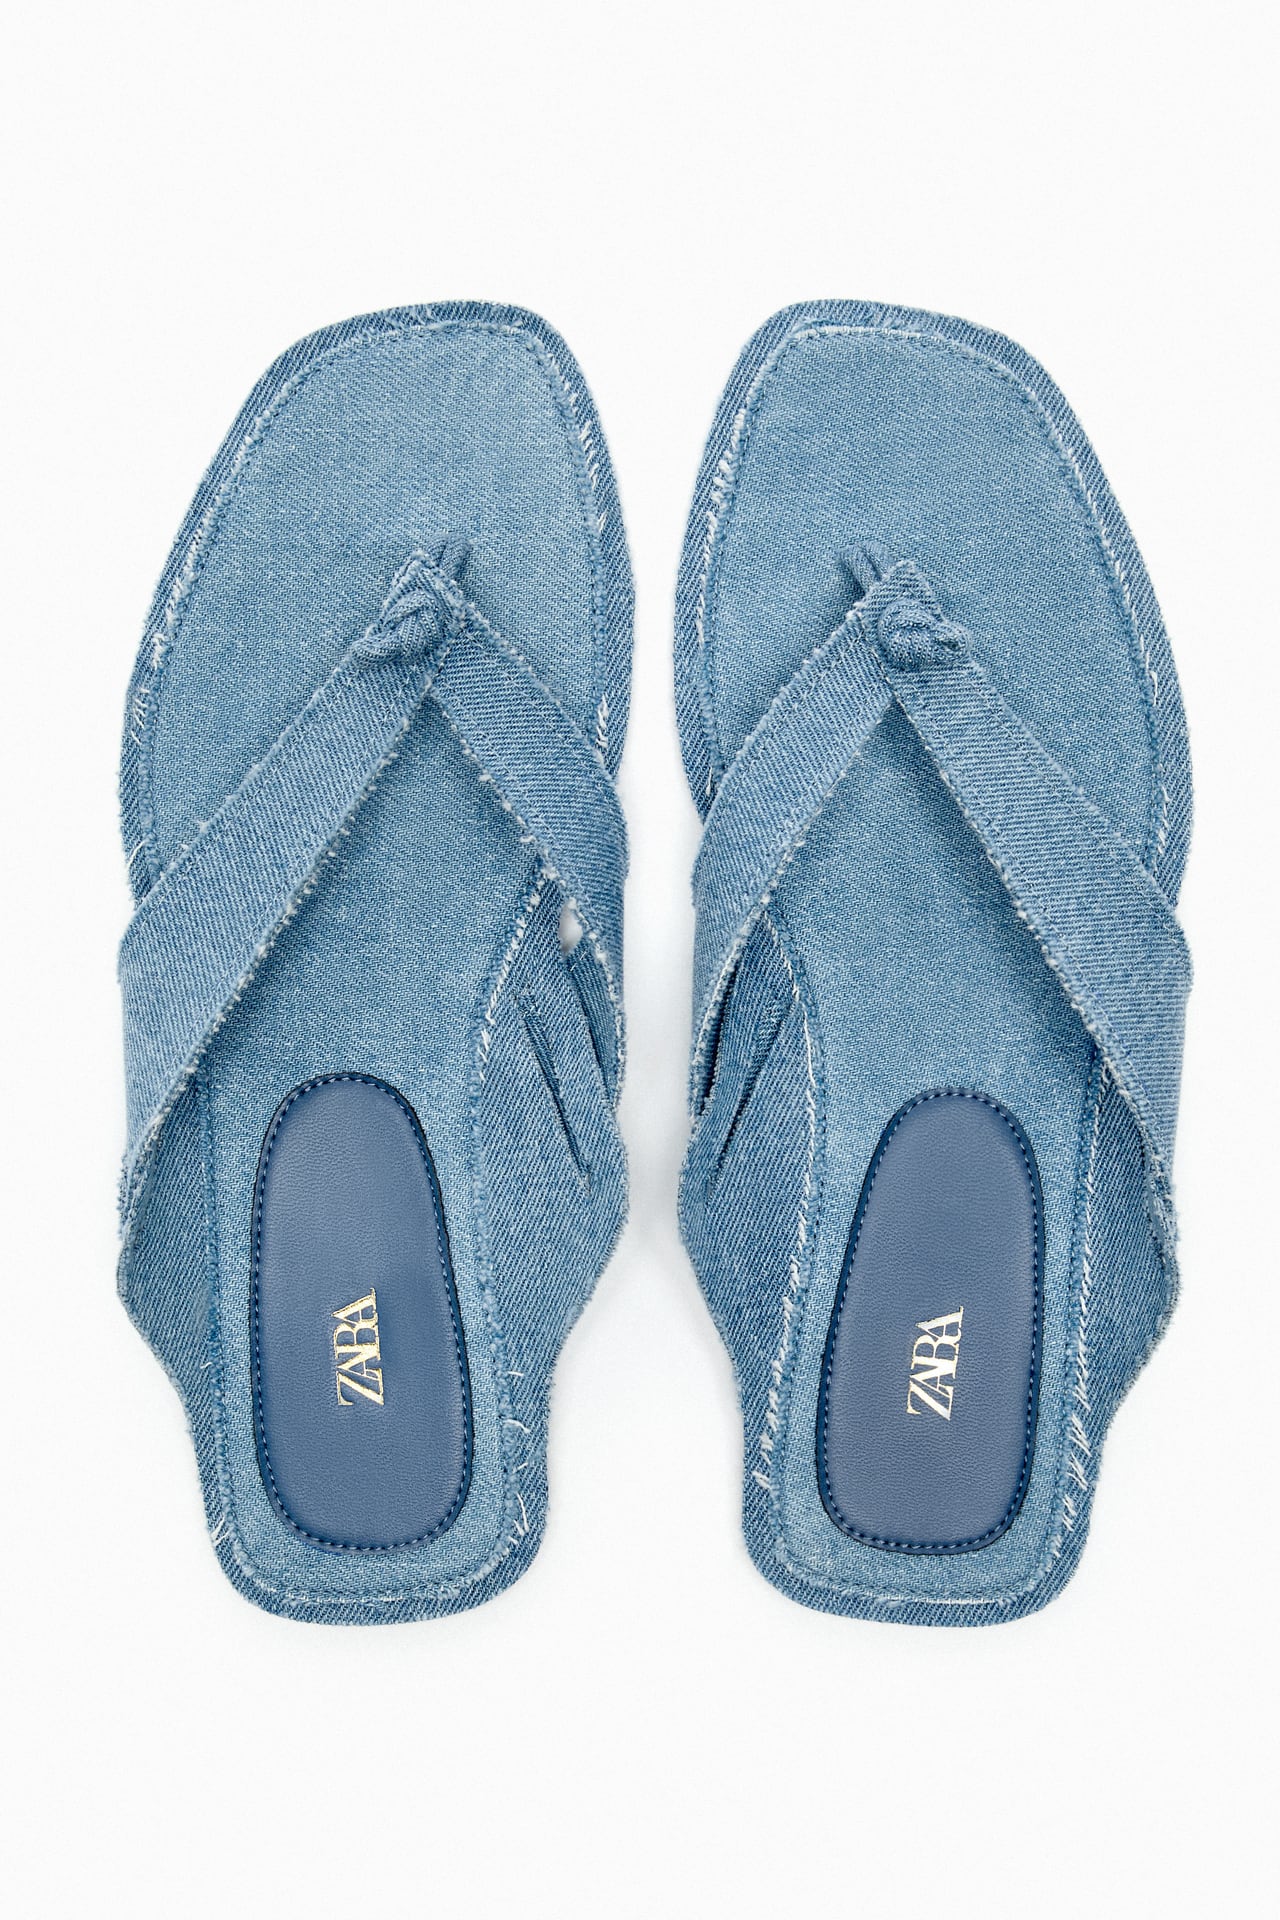 Buy Blue Sandals for Men by Buda Jeans Co Online | Ajio.com